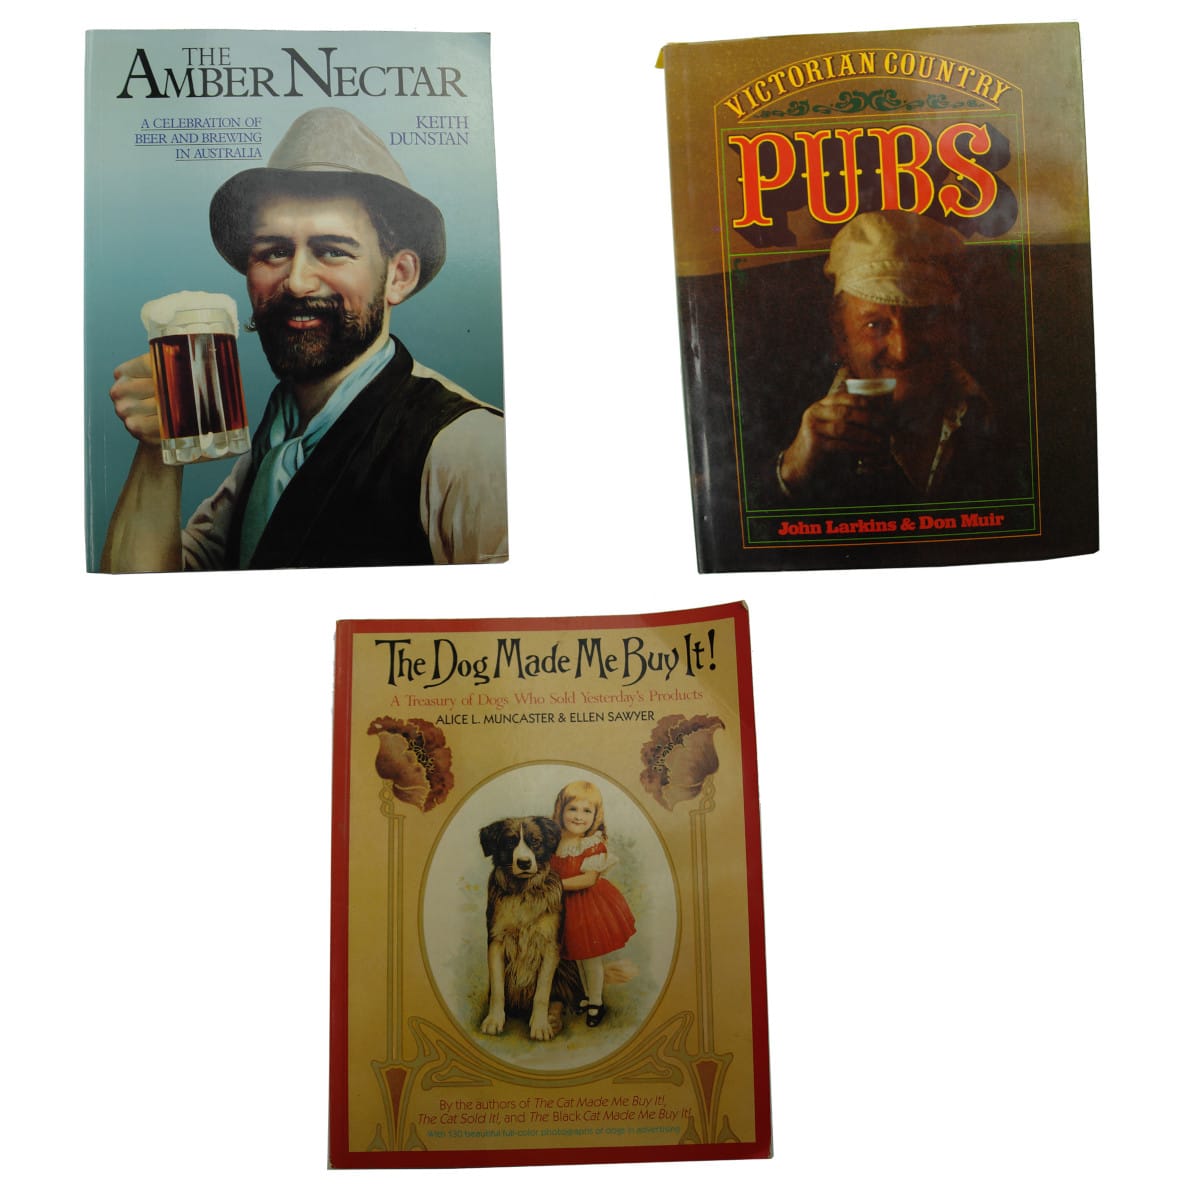 3 Books: The Amber Nectar, Dunstan; The Dog Made Me Buy It!; Victorian Country Pubs.